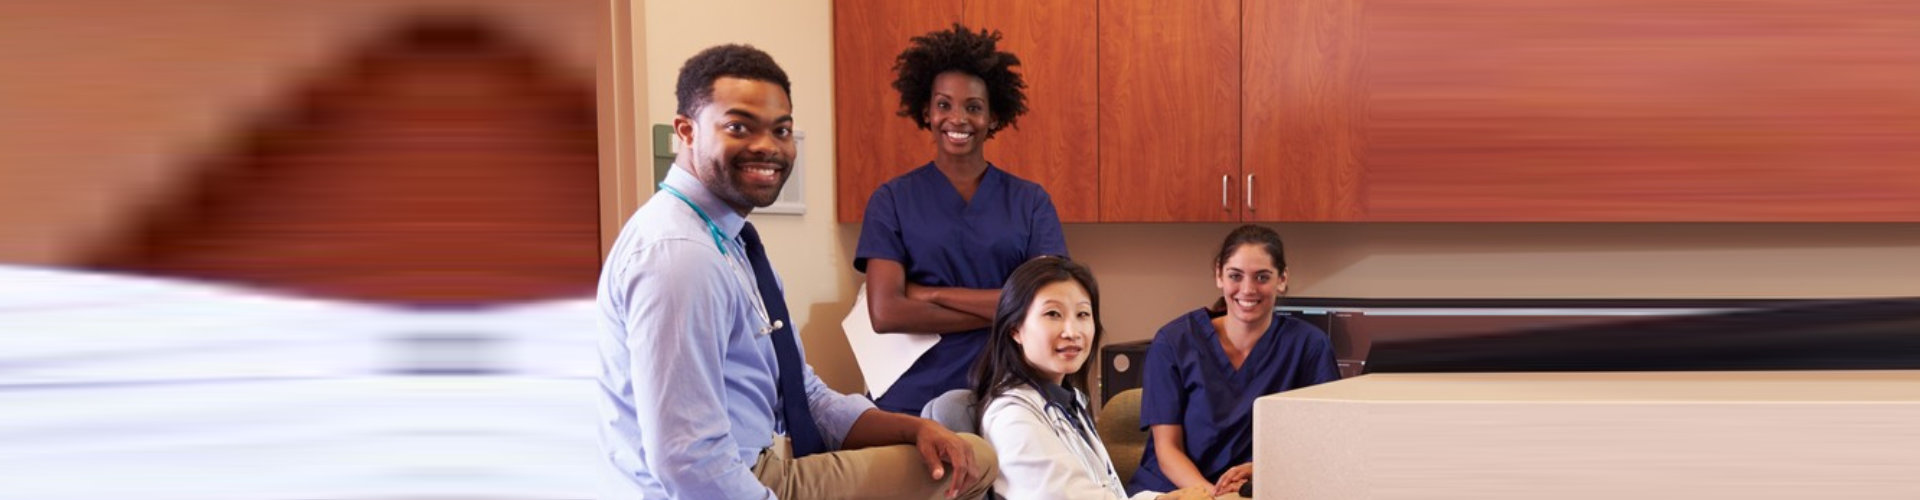 group of medical professionals smiling